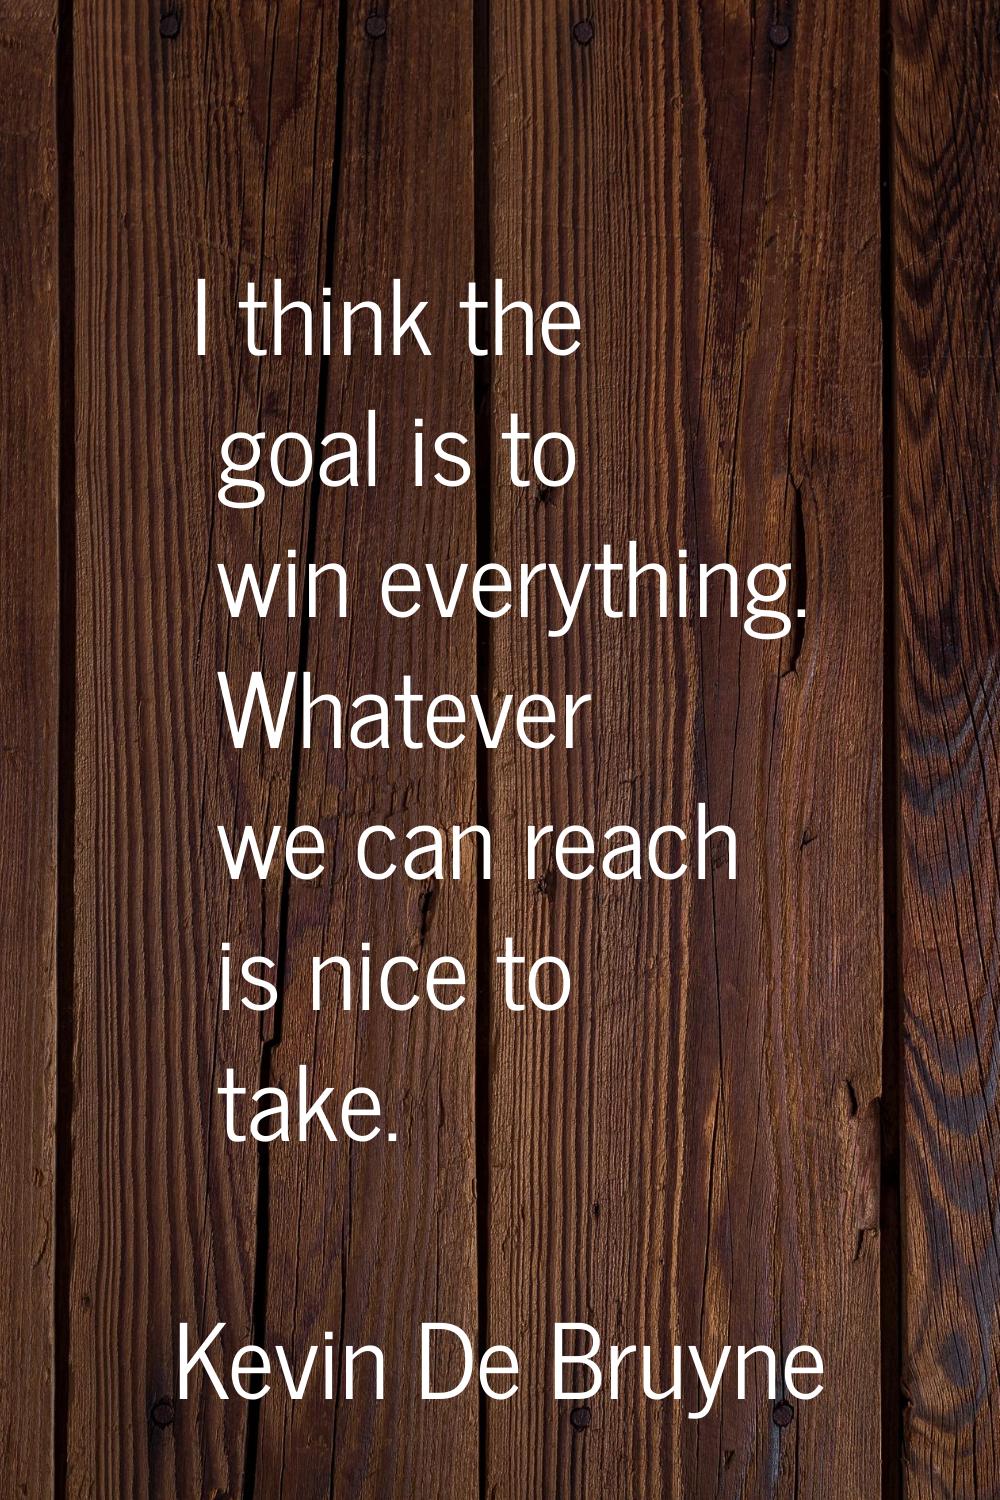 I think the goal is to win everything. Whatever we can reach is nice to take.